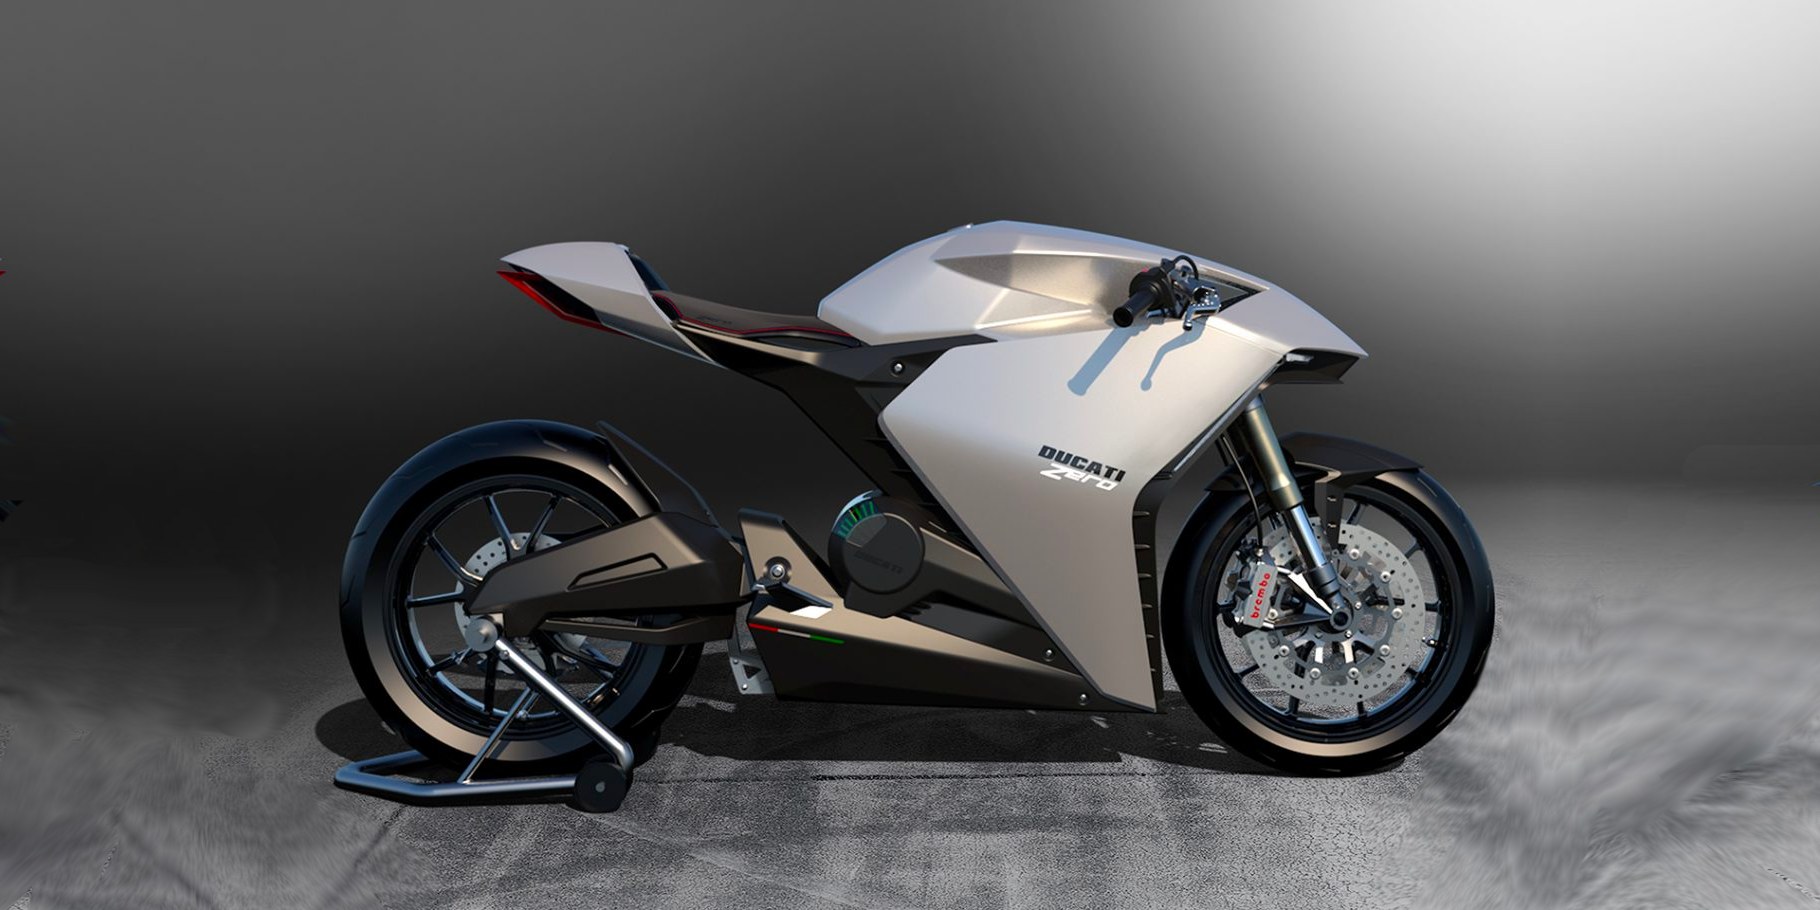 One of the major difficulties Ducati faces in producing electric motorcycles is battery technology